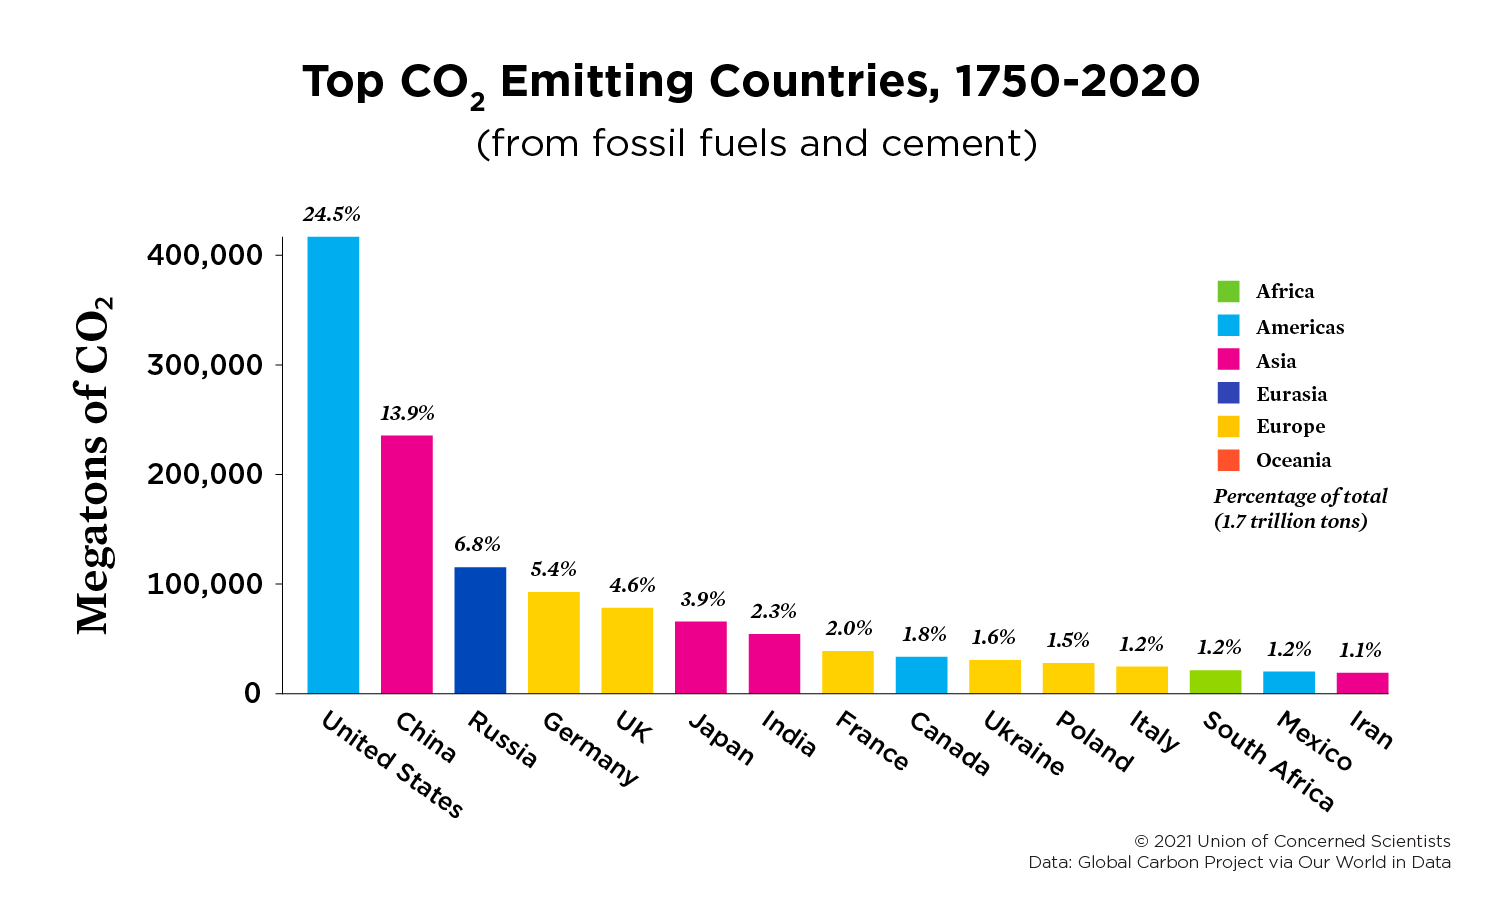 A table showing the top CO2 emitting countries from 1750-2020